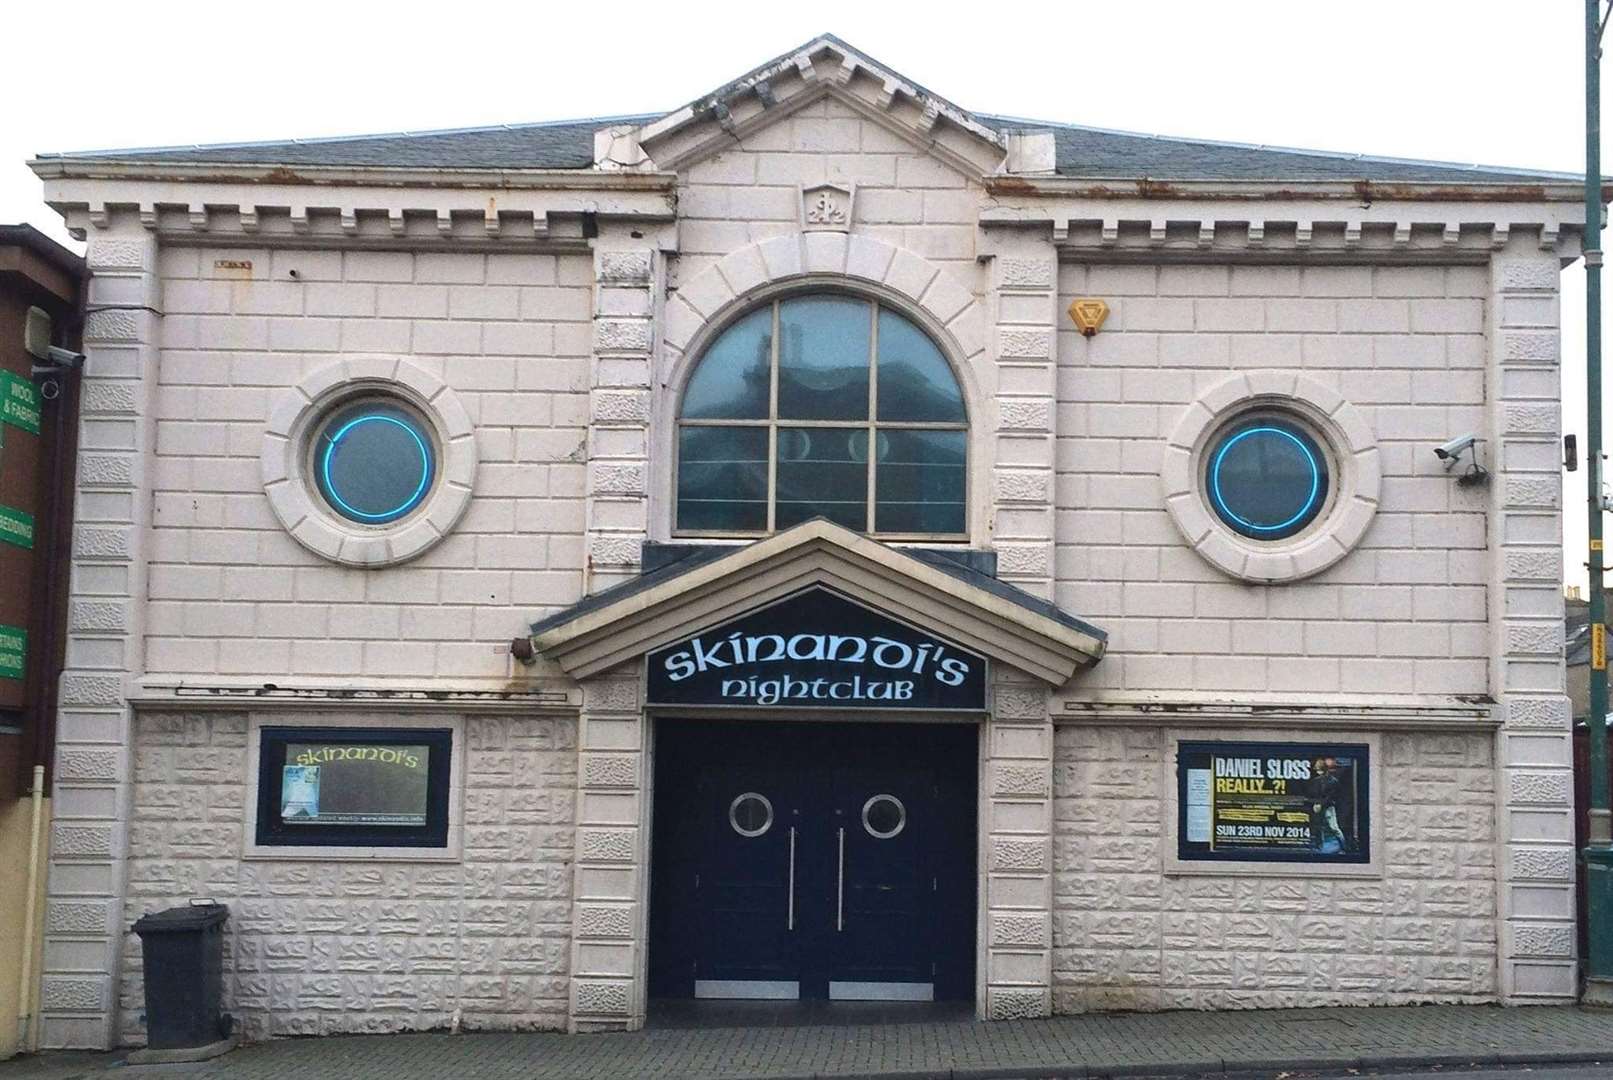 The offence took place as people were leaving Skinandi's nightclub in Thurso.